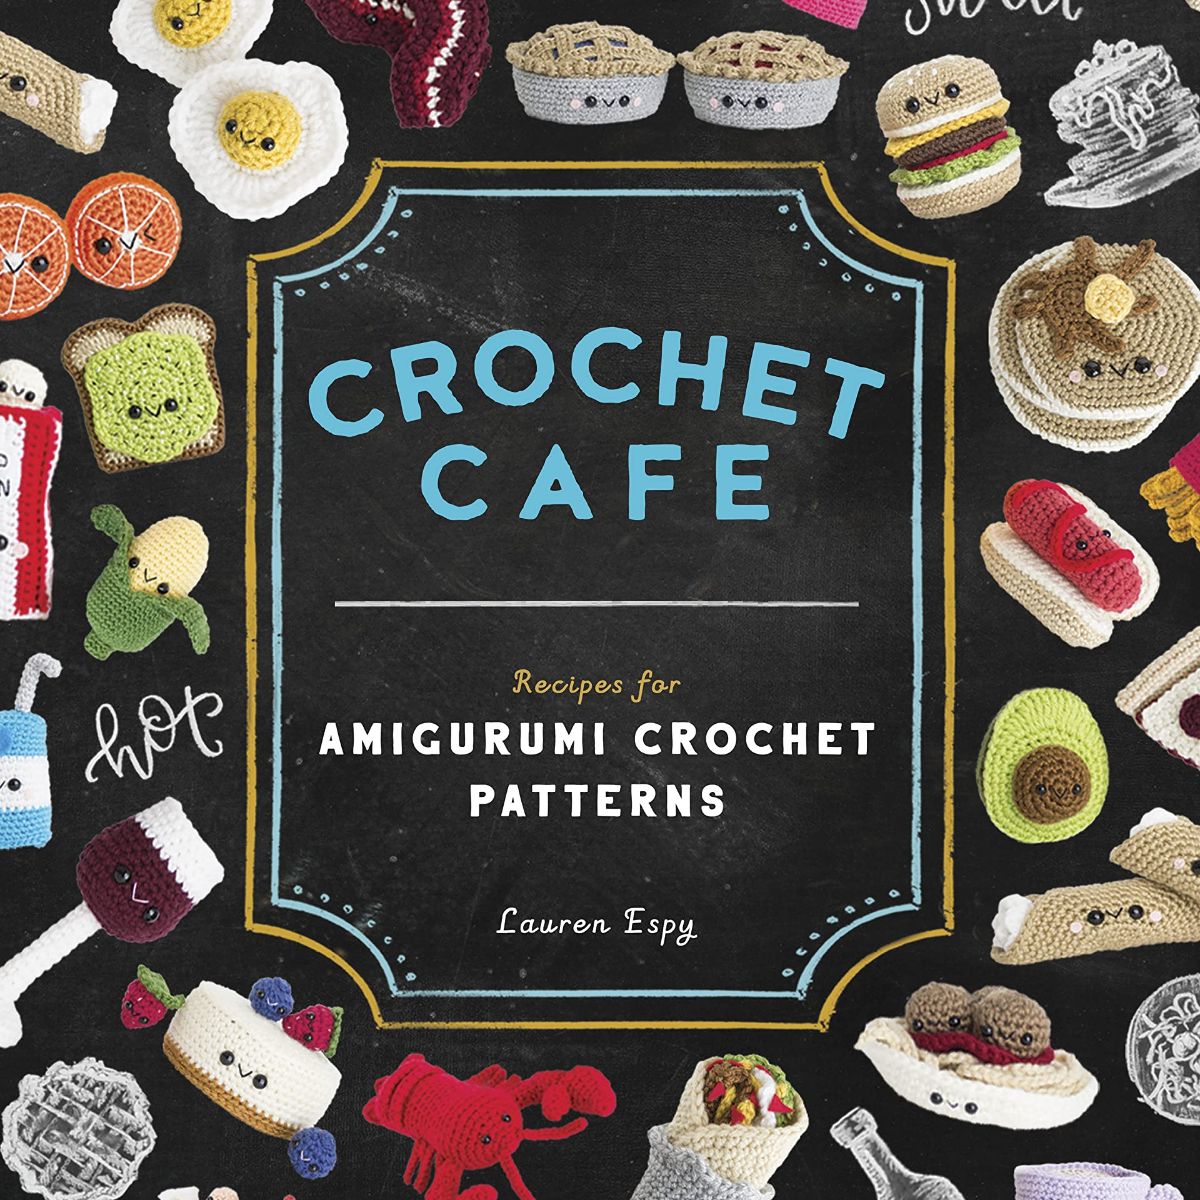 Paige Tate & Co.-Crochet Cafe-book-gather here online